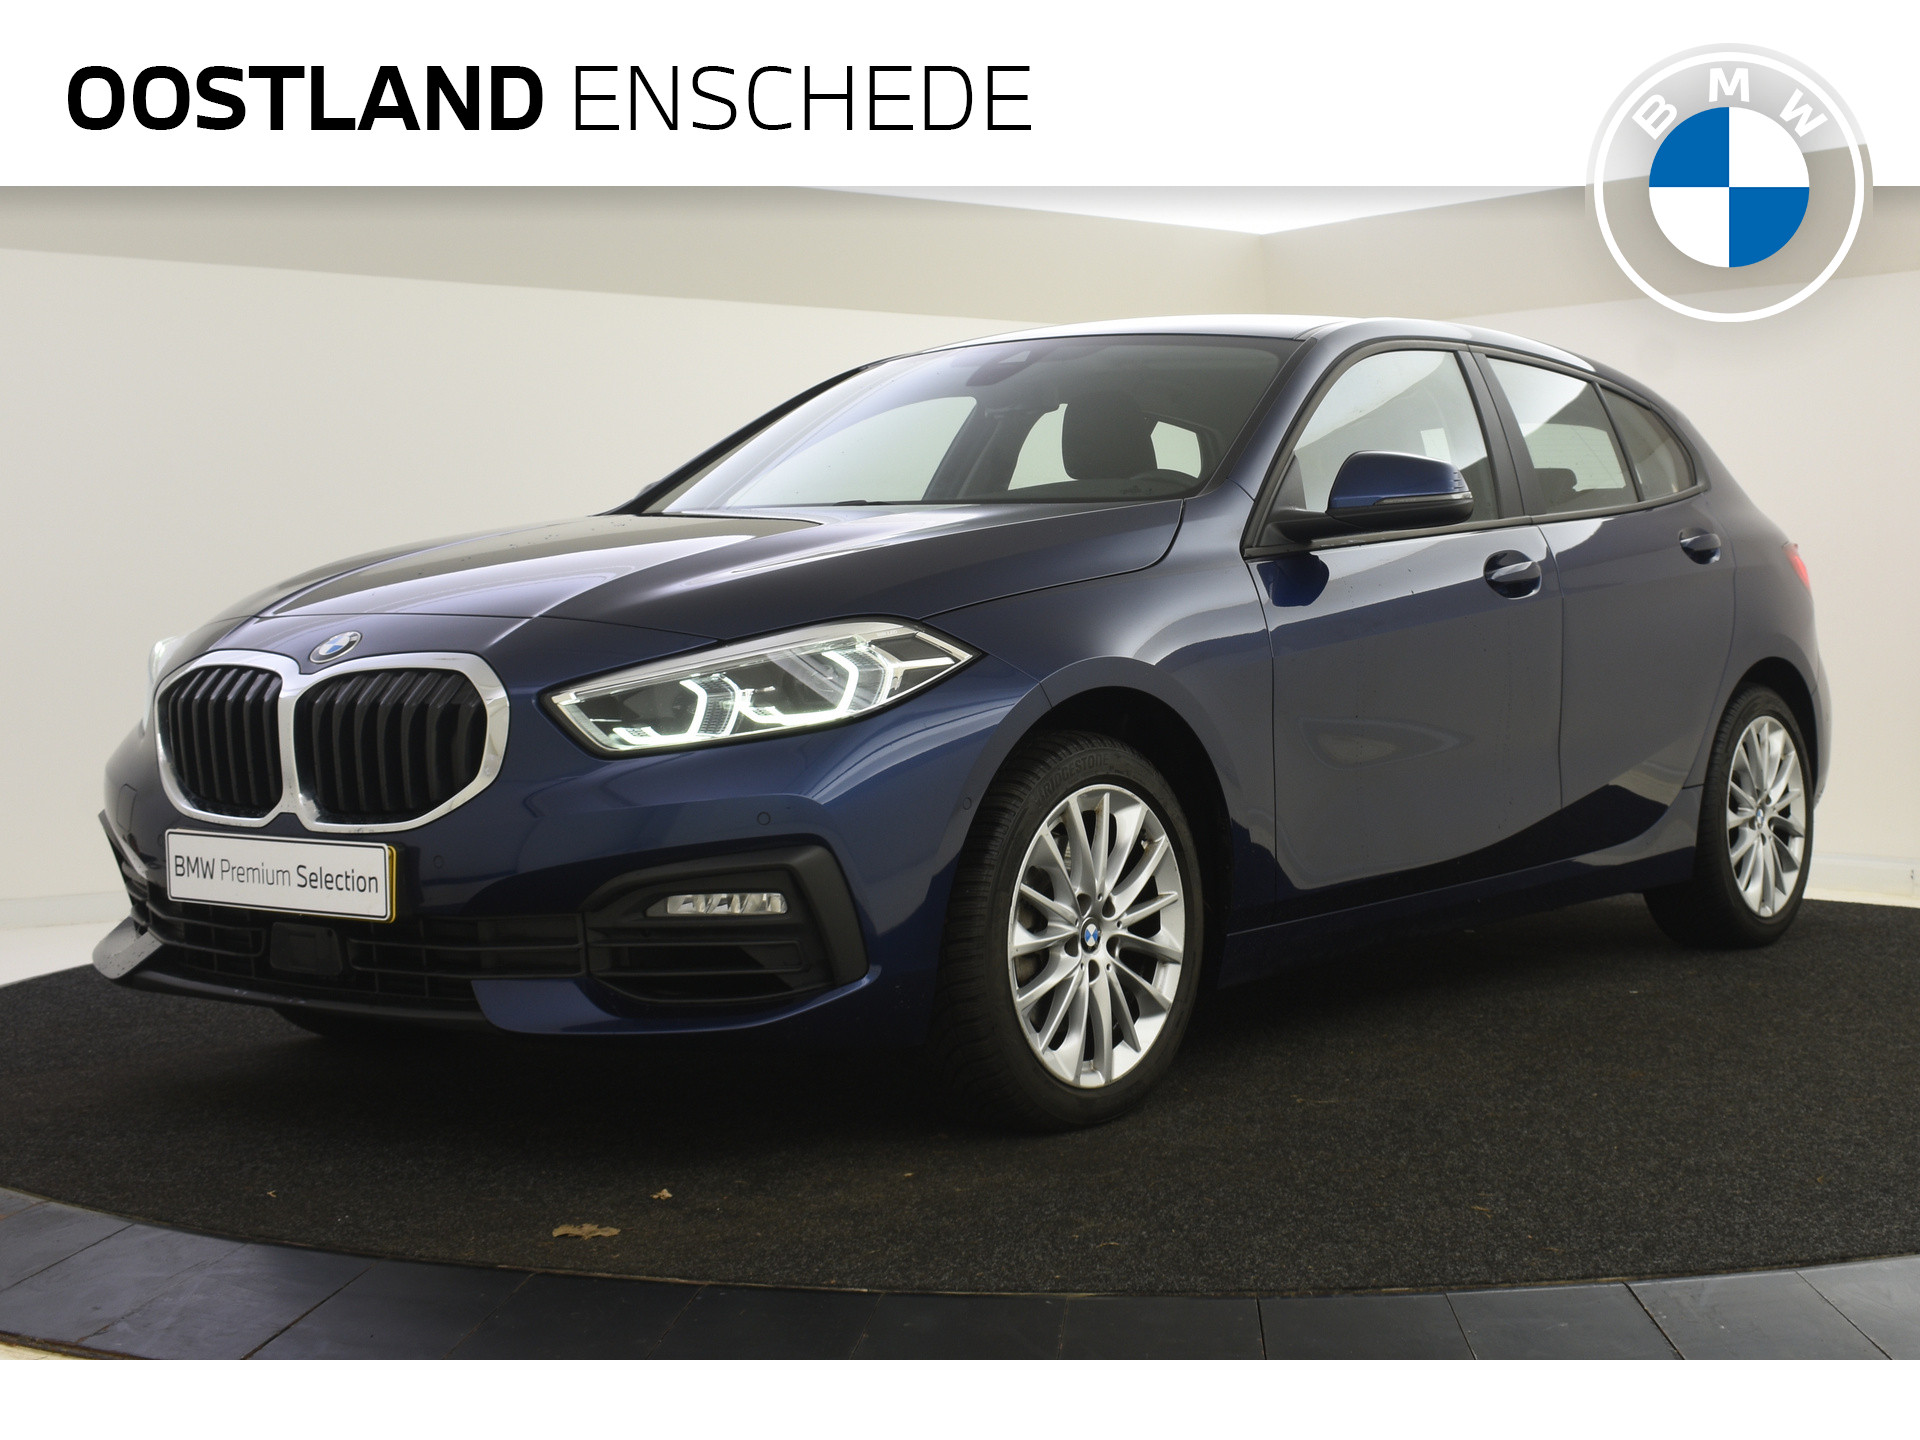 BMW 1-serie 118i High Executive Automaat / Active Cruise Control / LED / Parking Assistant / Stoelverwarming / Live Cockpit Professional bij viaBOVAG.nl